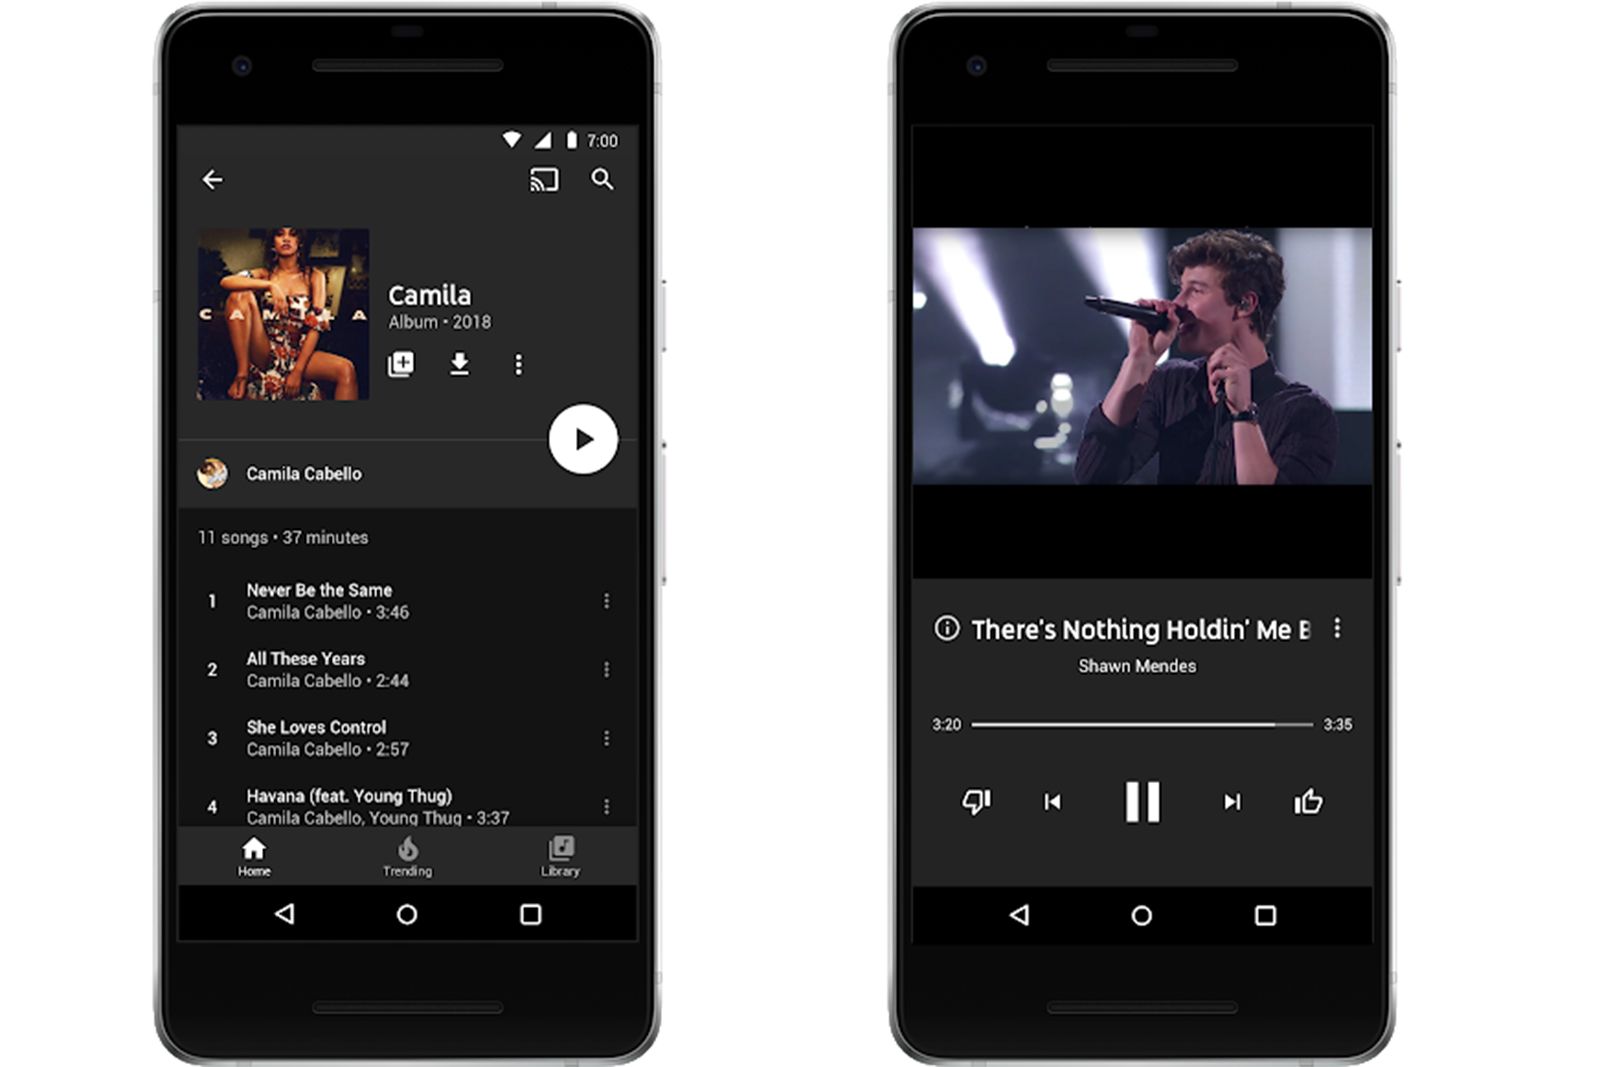 YouTube Music streaming service launches bringing together music and video image 2